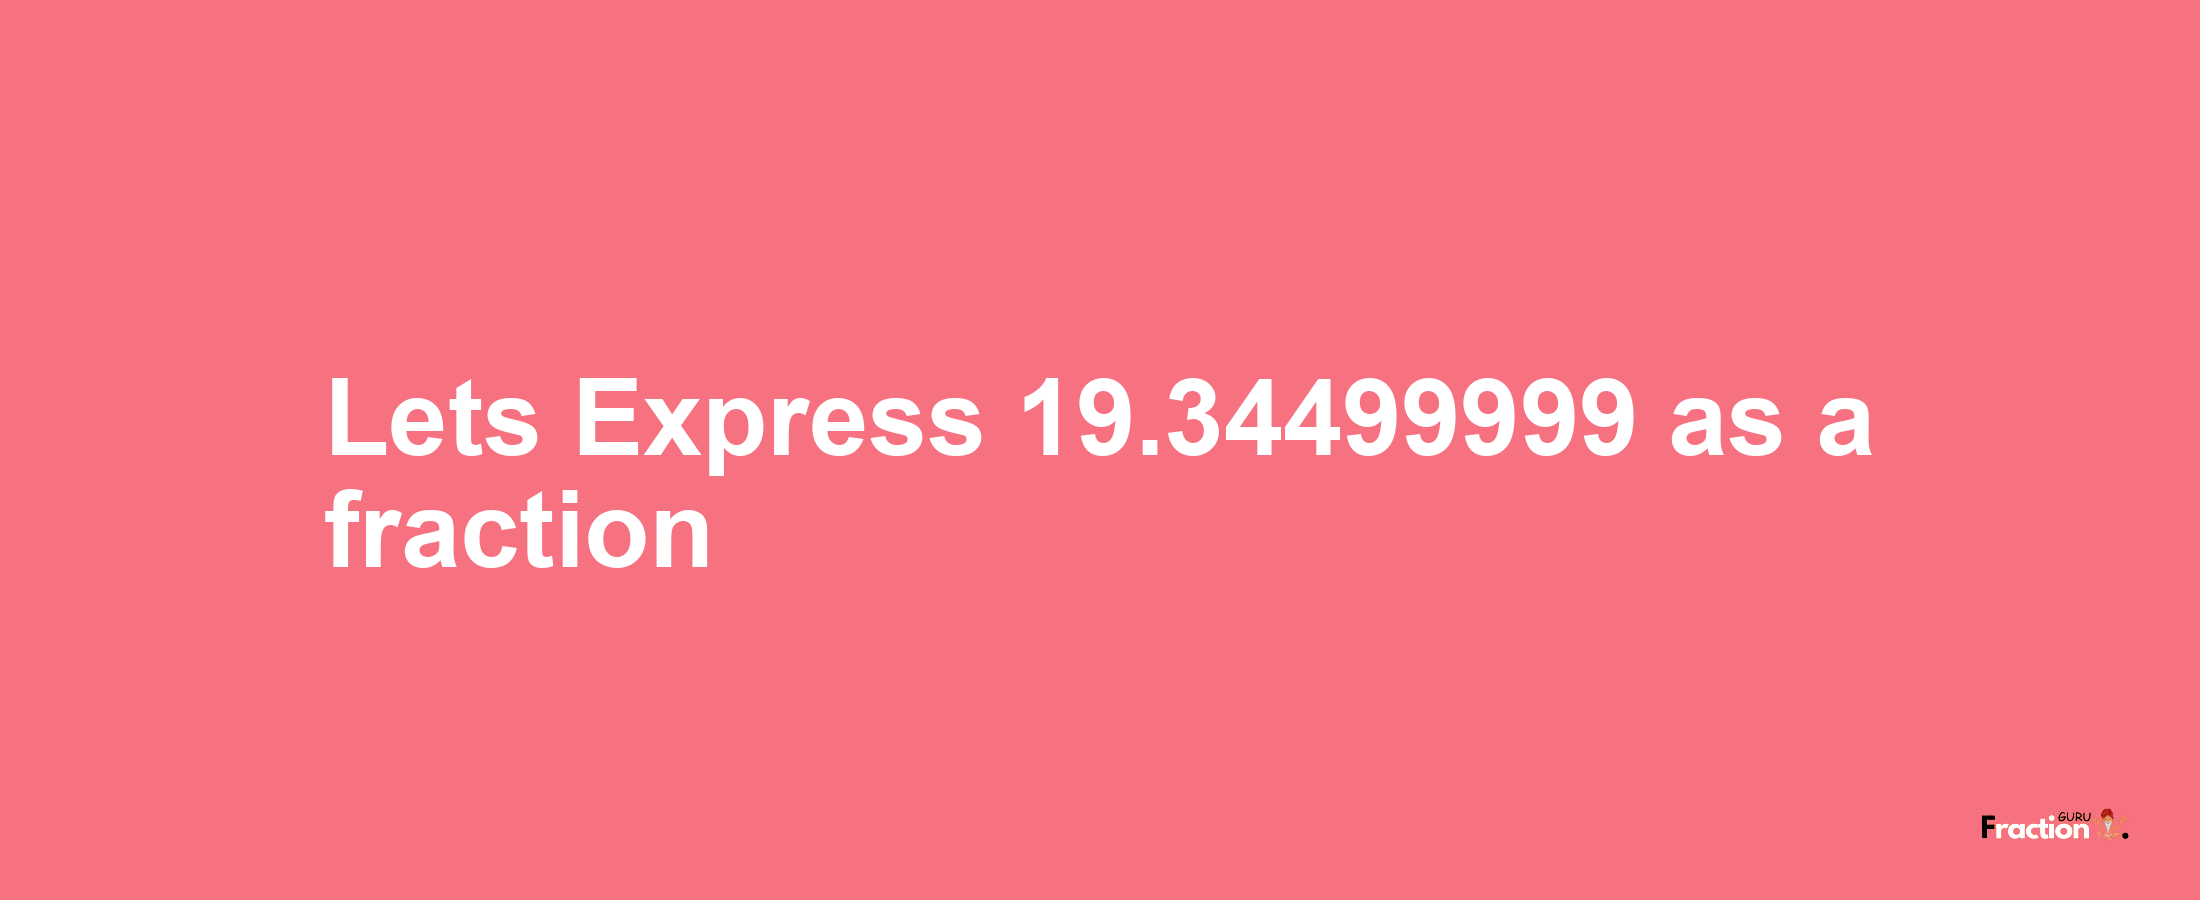 Lets Express 19.34499999 as afraction